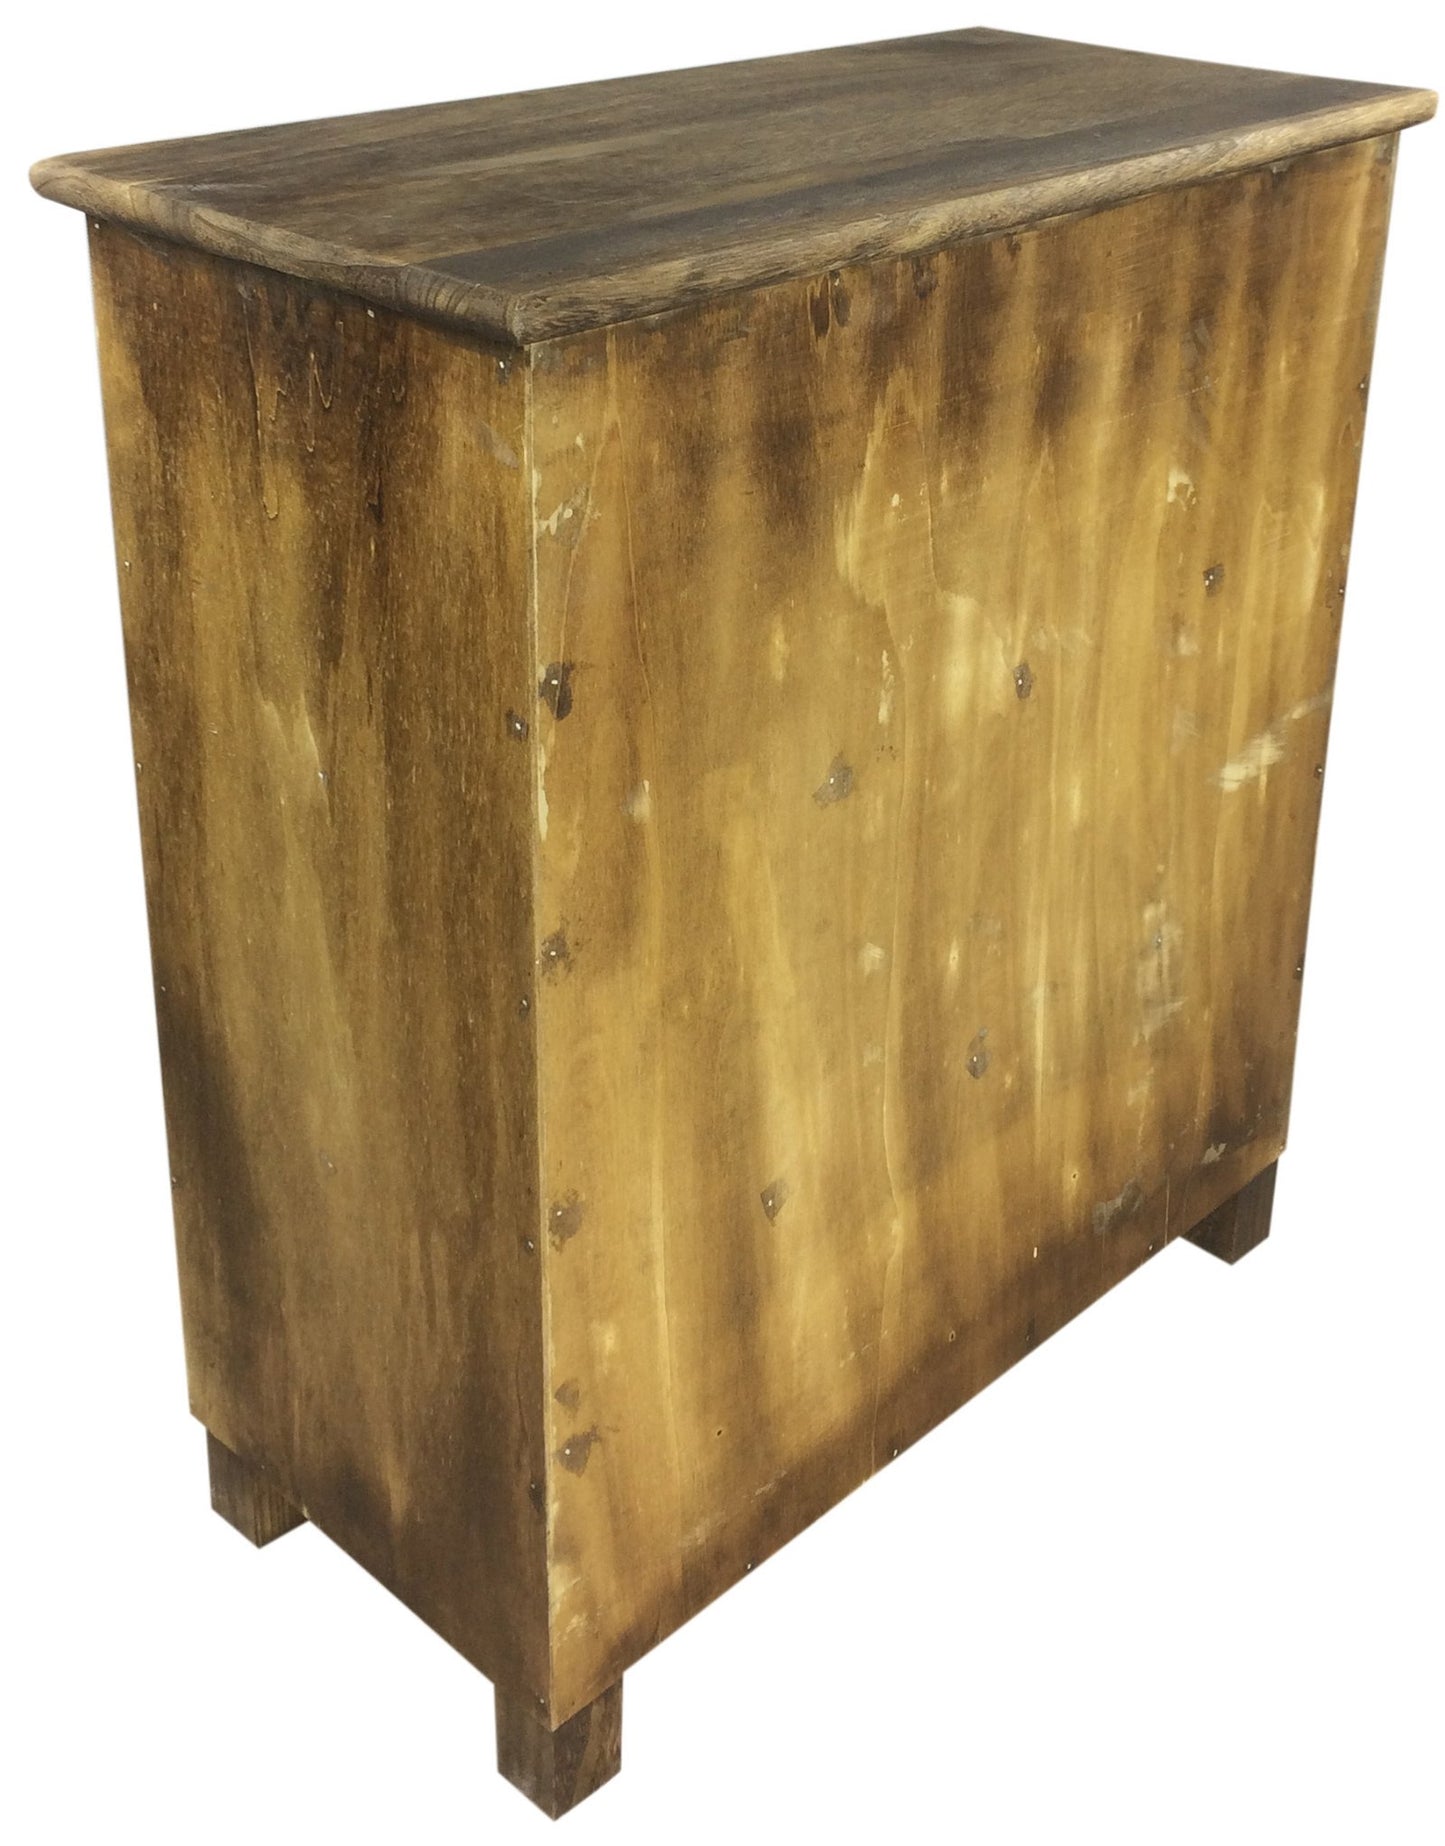 6 Drawer Wooden Storage Cabinet 69cm - Available in UK Only